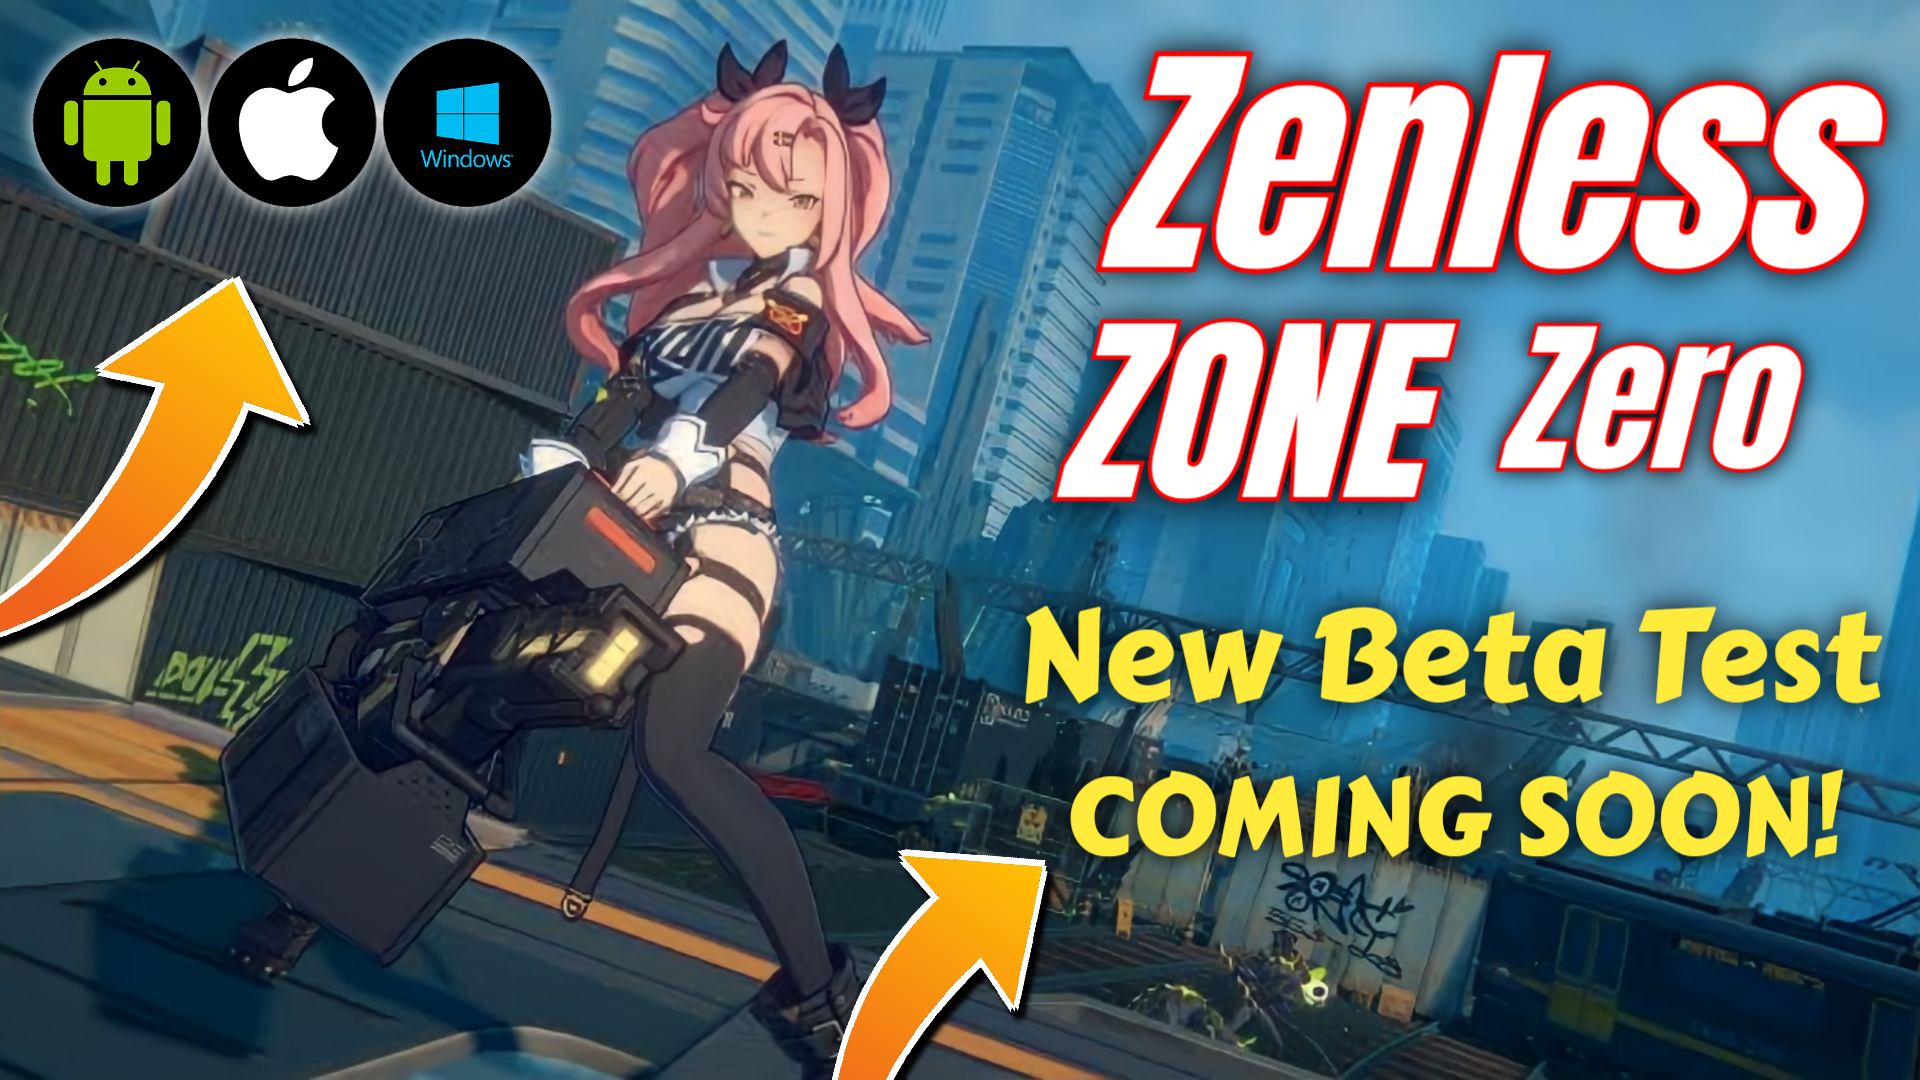 Zenless Zone Zero (Official Trailer) New Android I IOS Action RPG Games Pre  Registration 